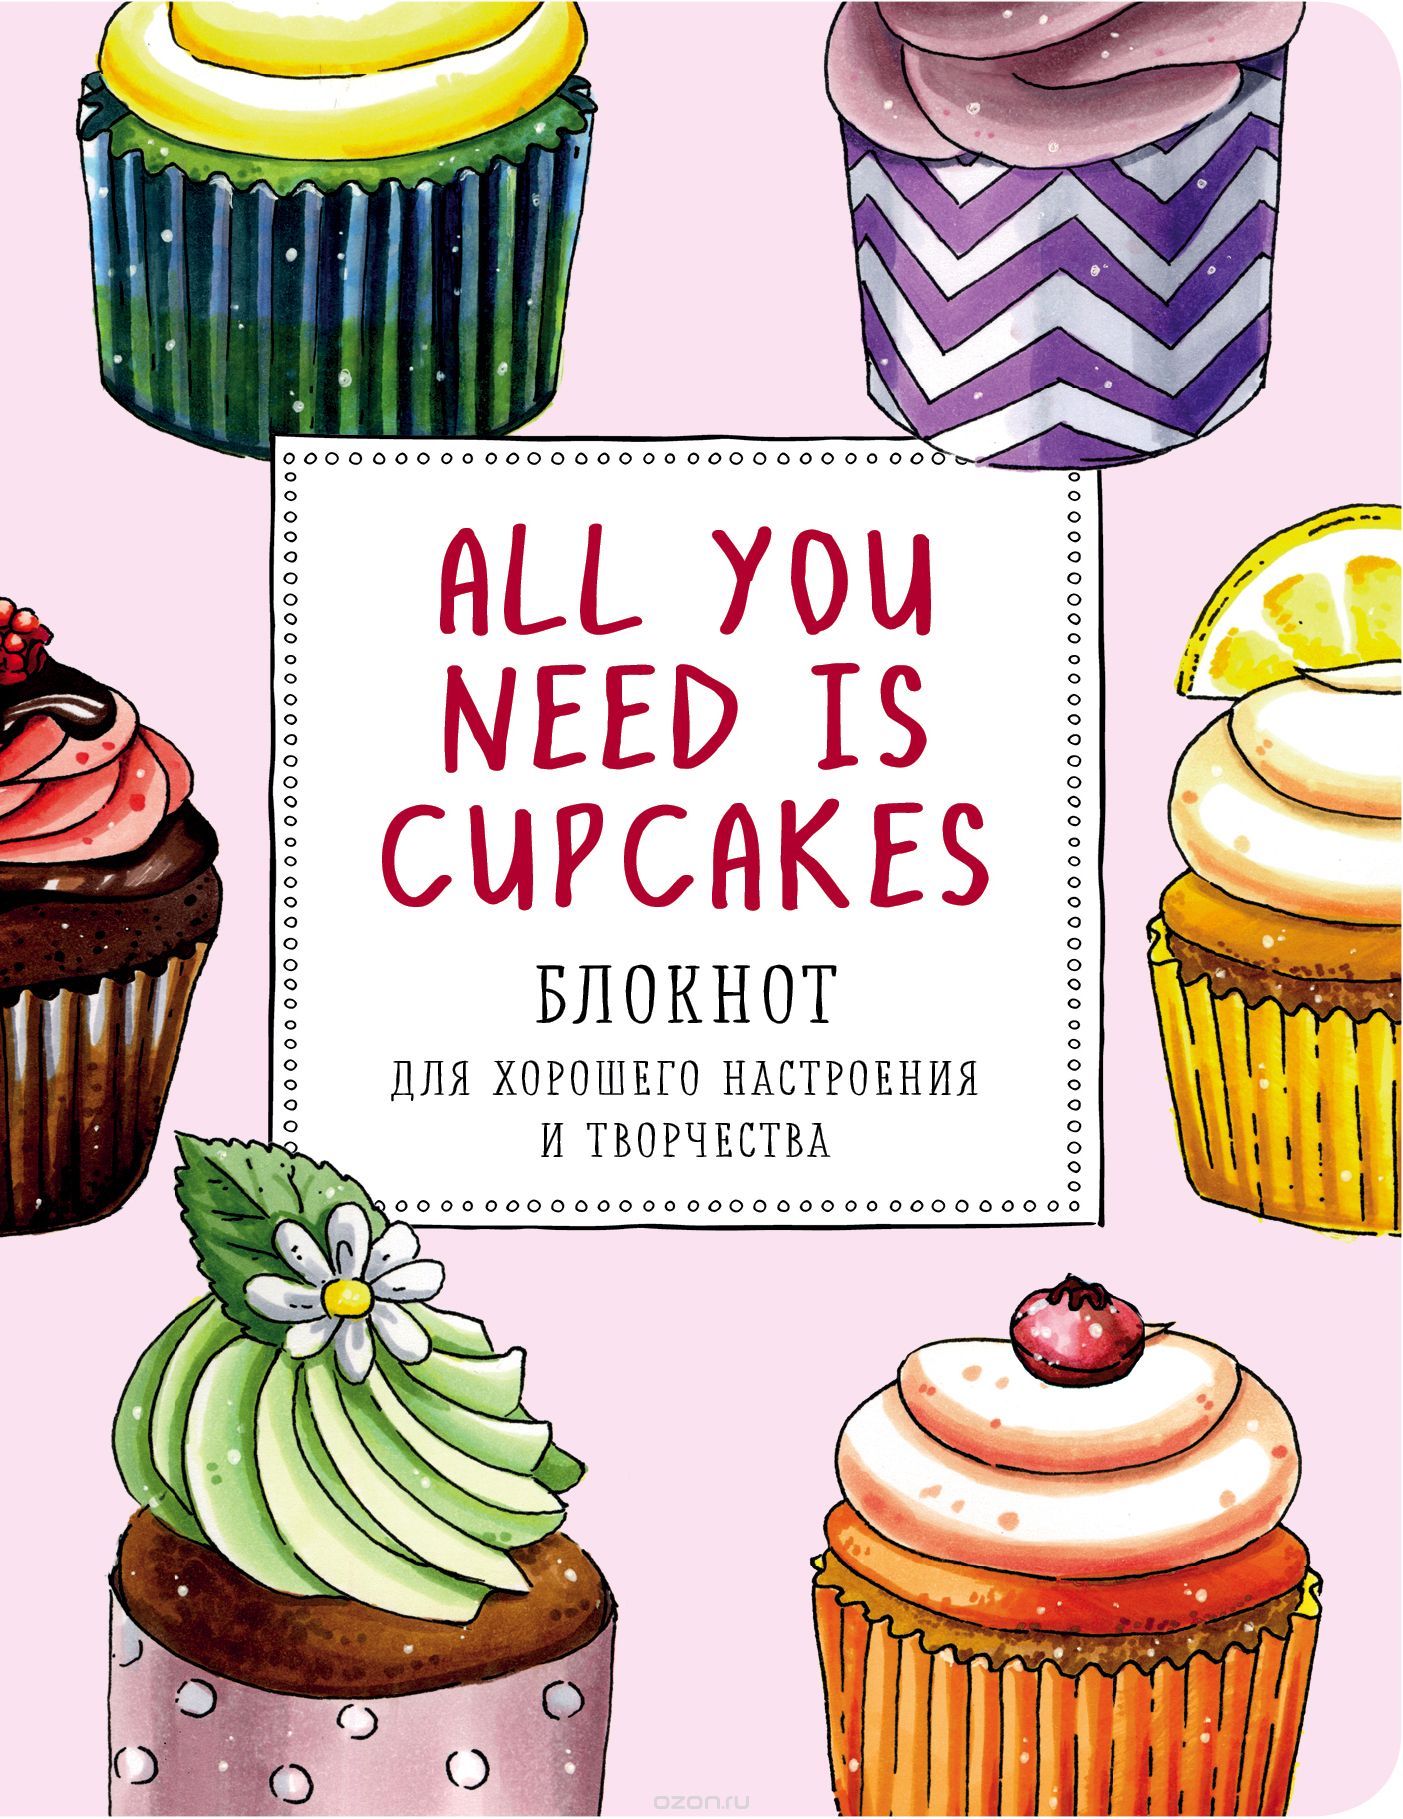 All you need is cupcakes